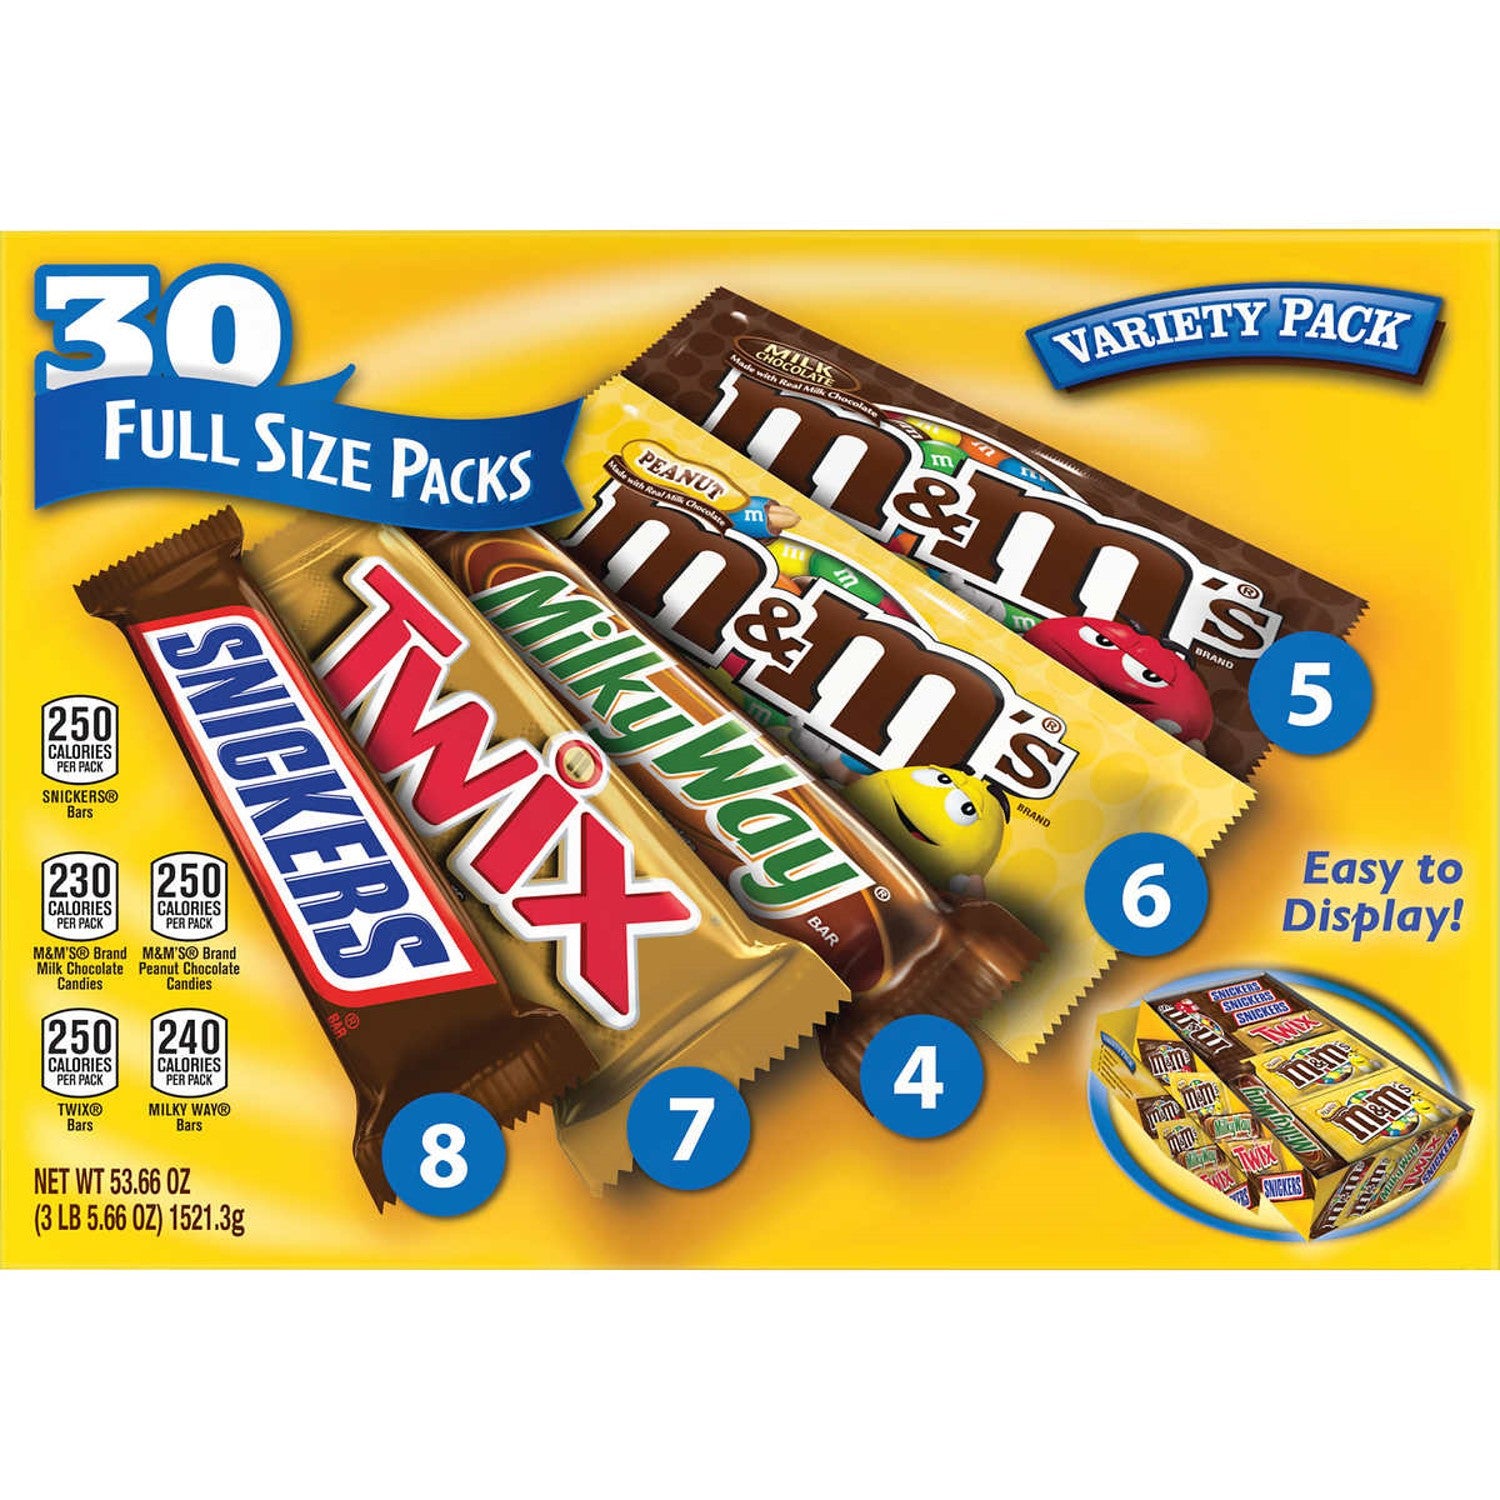 SNICKERS, M&M'S Caramel, TWIX & MILKY WAY Caramel Lovers Chocolate Candy  Variety Pack - 33.43 oz/55ct